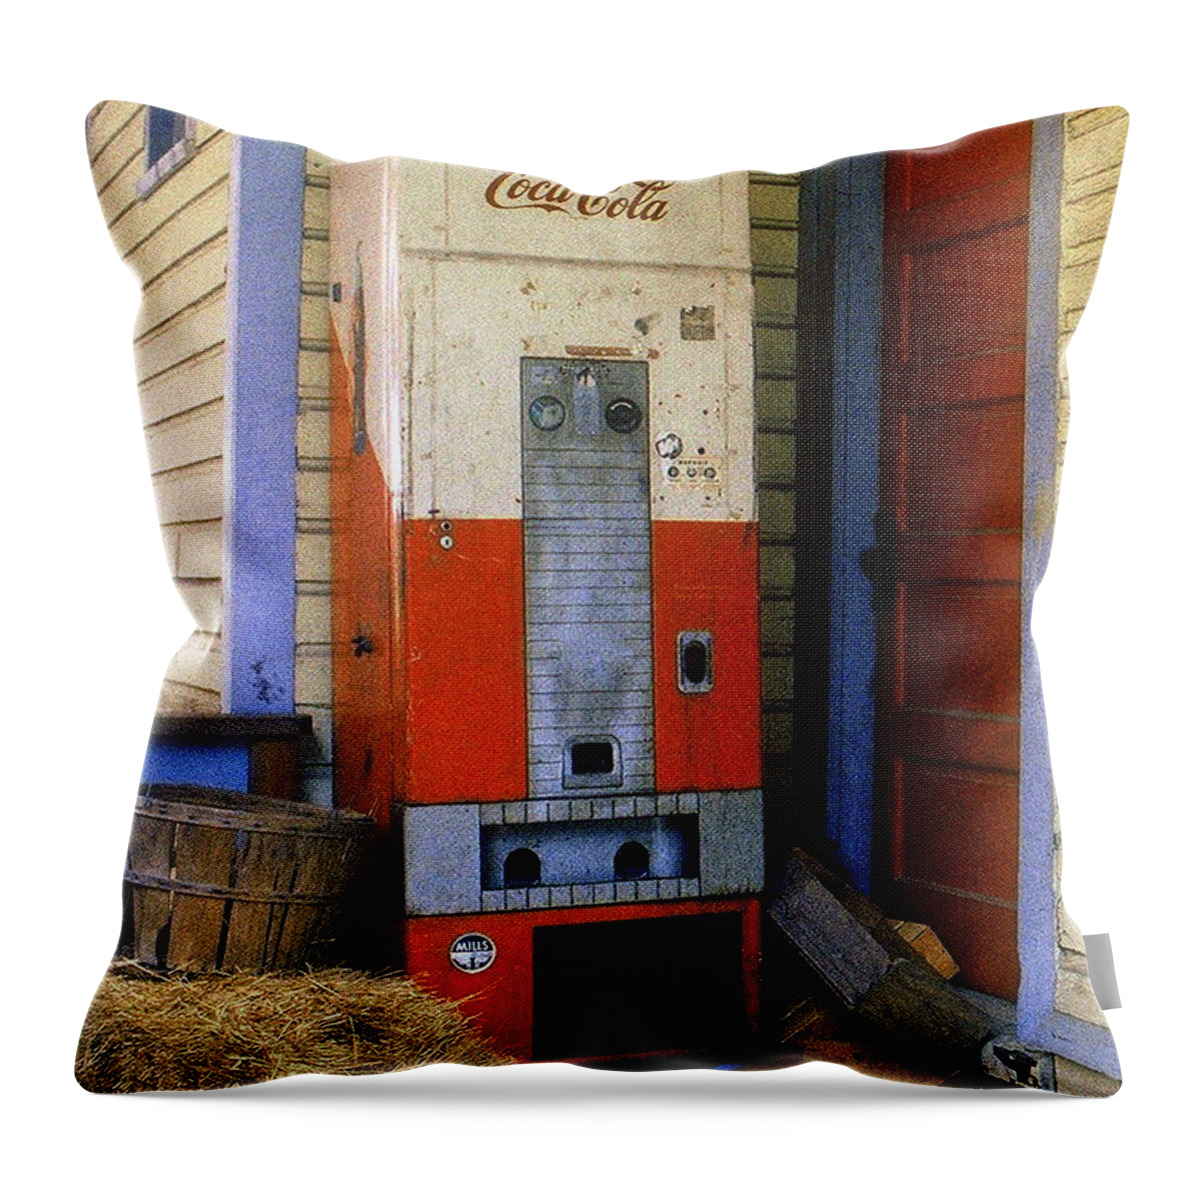 Fine Art Throw Pillow featuring the photograph Old Coke Machine by Rodney Lee Williams